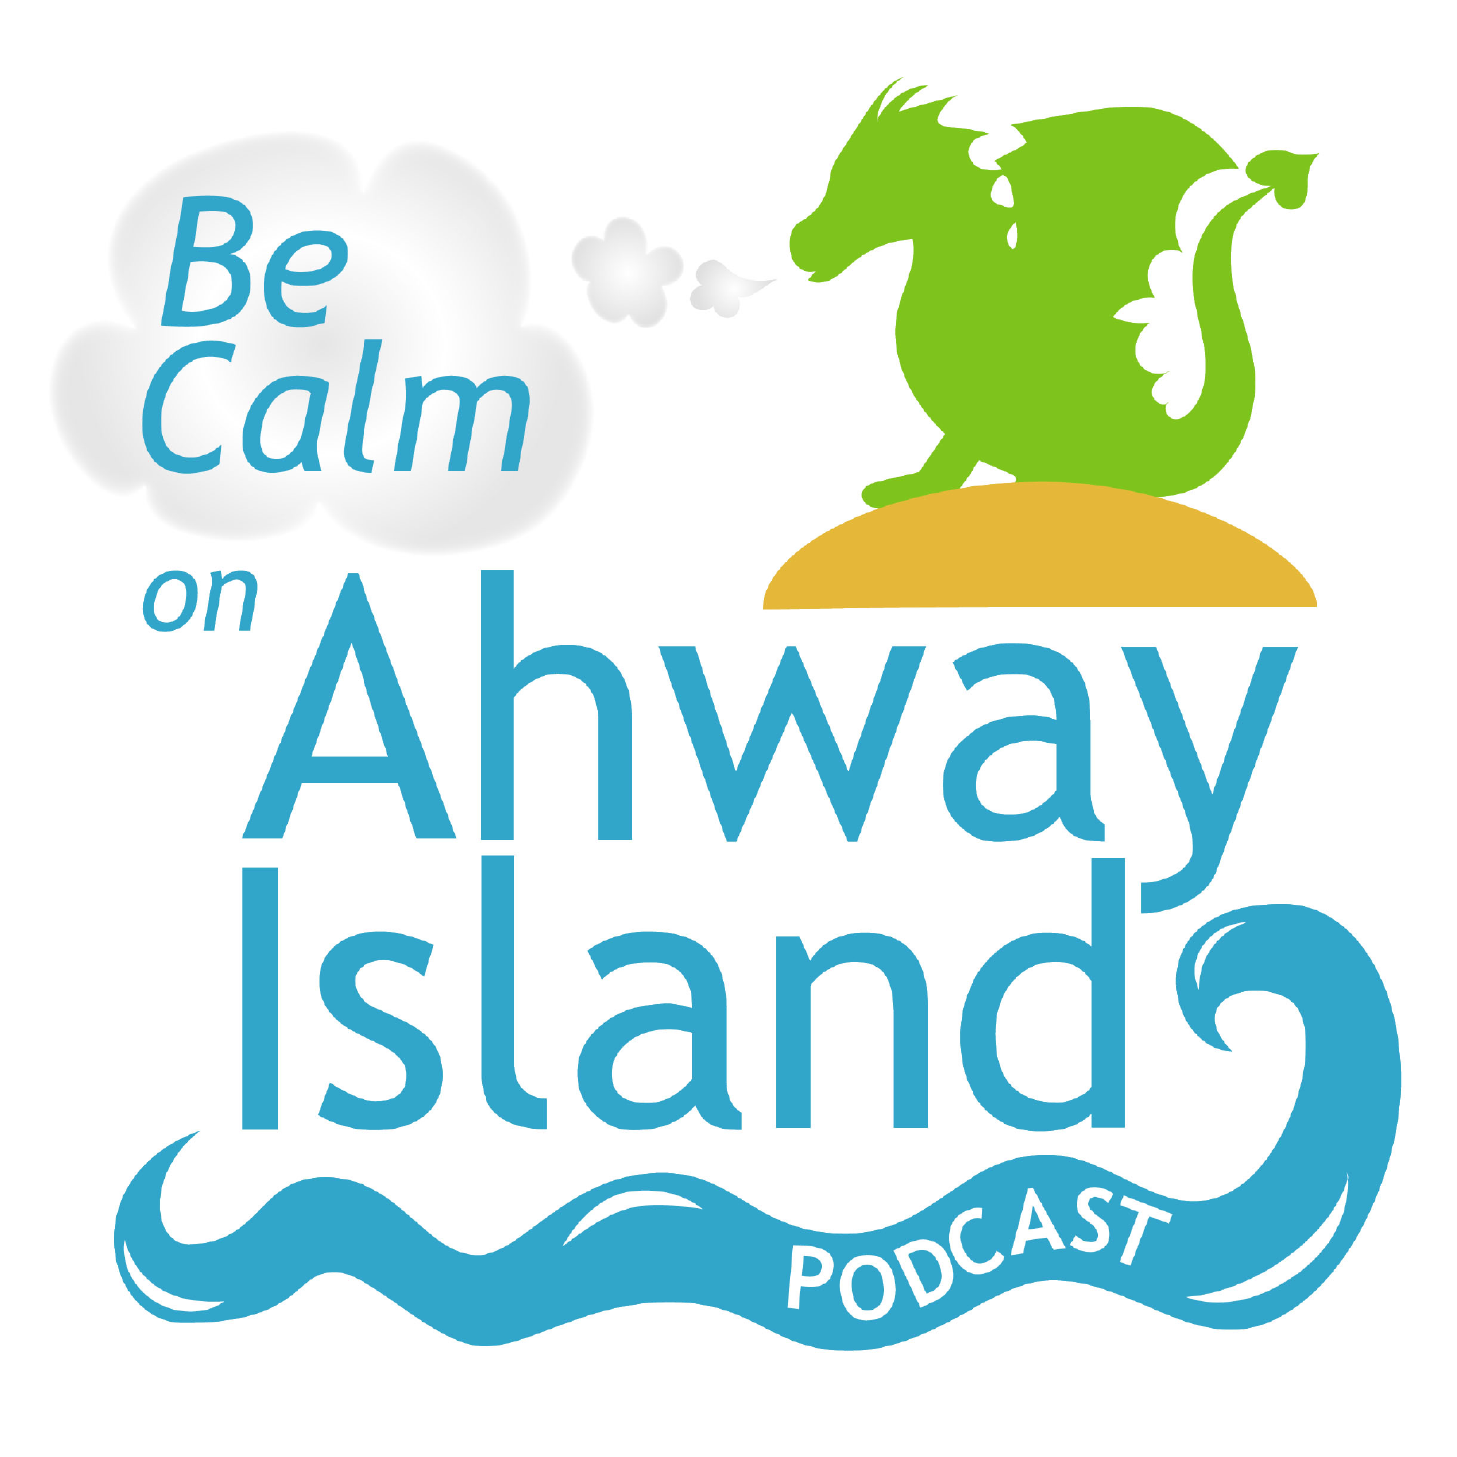 Ahway Island:Sheep Jam Productions